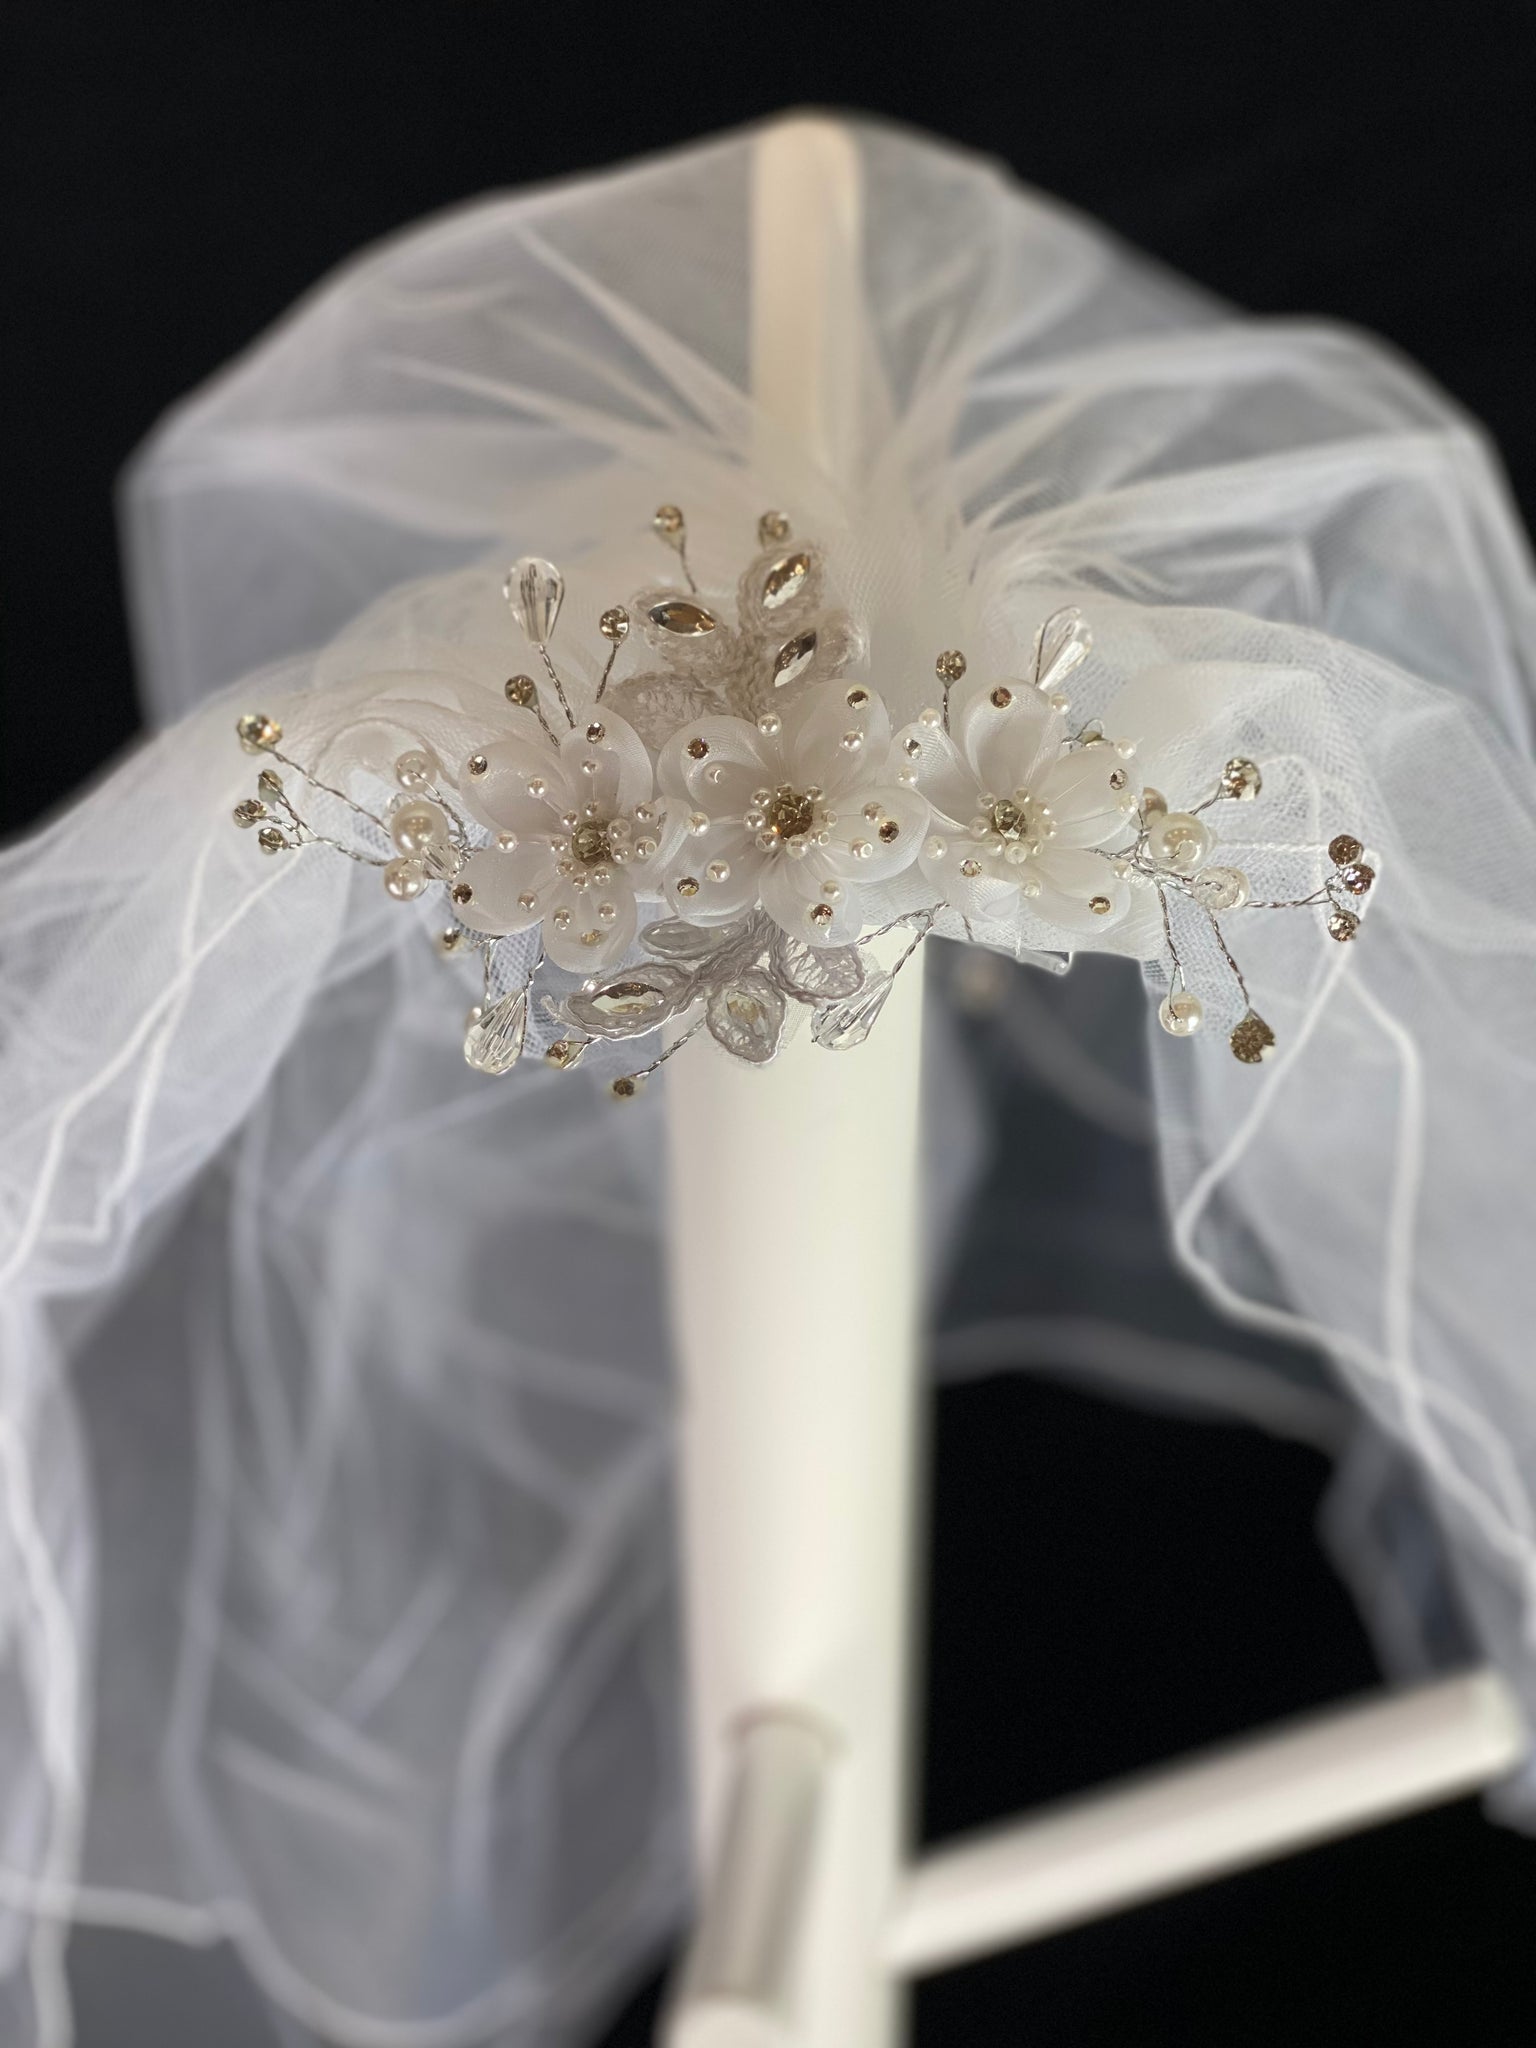 White Elegant Decorative Comb Veil with flowers and rhinestones.  Elegant soft 2 layer tulle veil with delicate hand stitched braided satin trim around the edge and handmade decorative comb with beautiful organza flowers through center with rhinestones on petals and centers. Stunning rhinestone leaves surrounding the flowers, with embroidered lace leaves through center flower.  This double layered veil reaches approximately 21" long. Veil has 2" long, 3" wide, comb to secure it in place. 